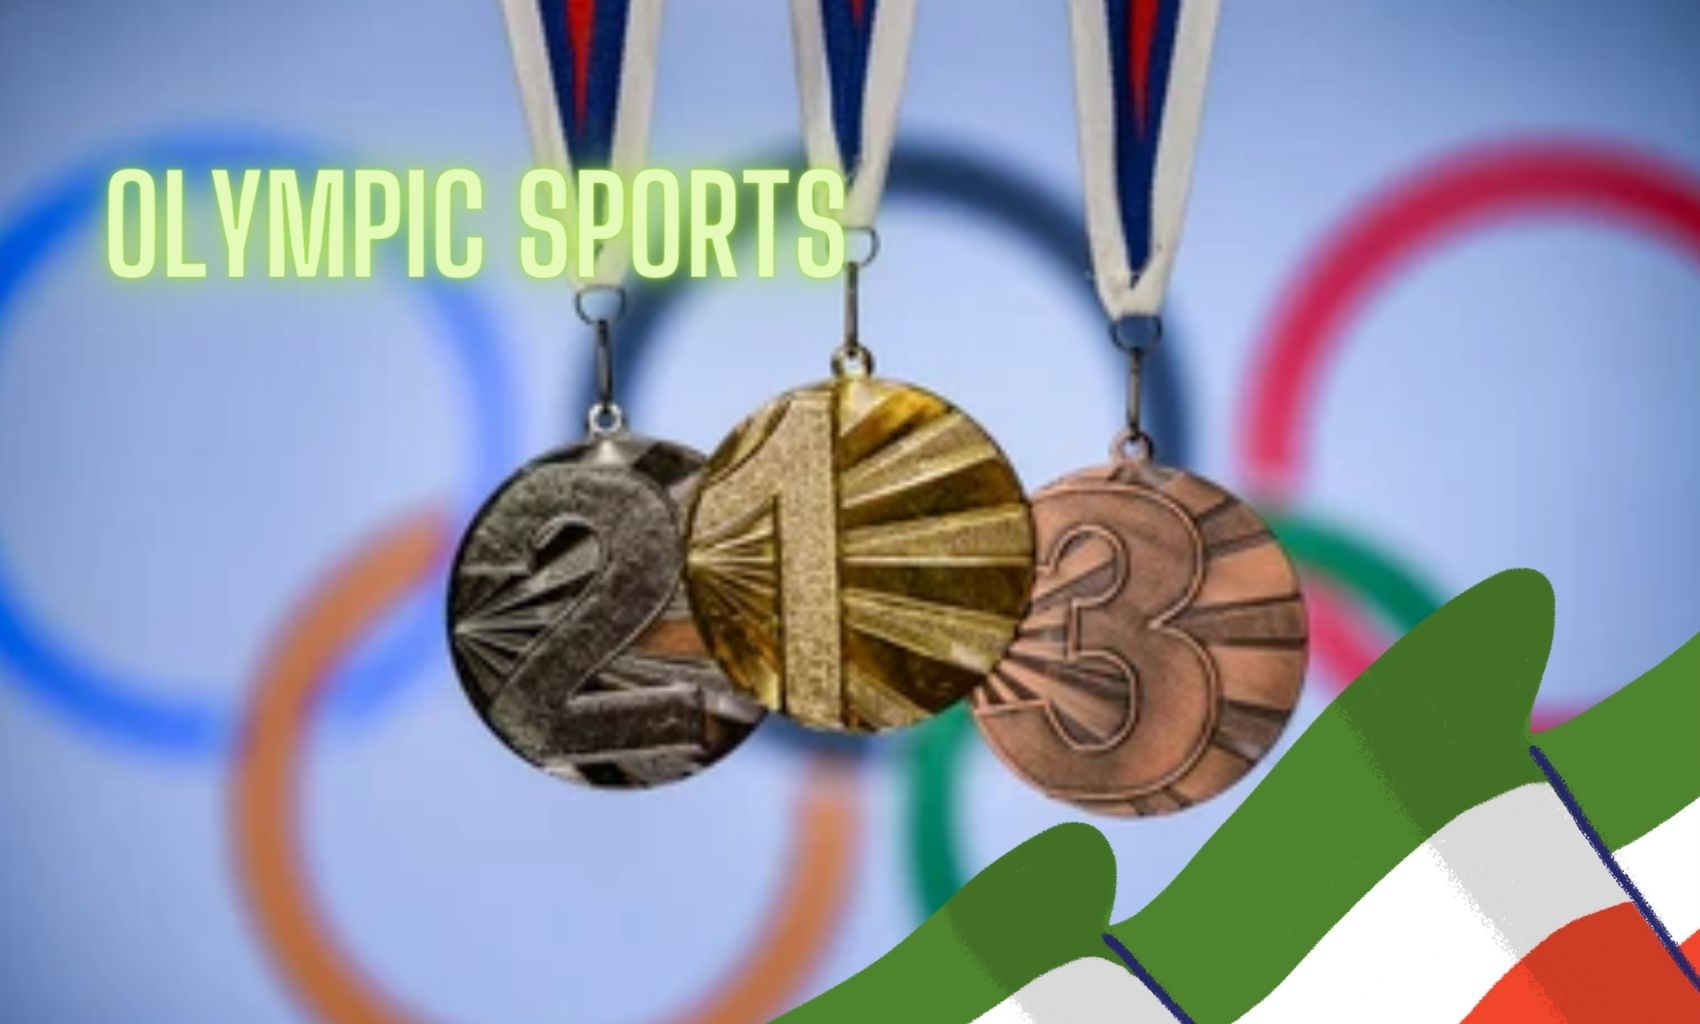 What are the most popular Olympic sports?